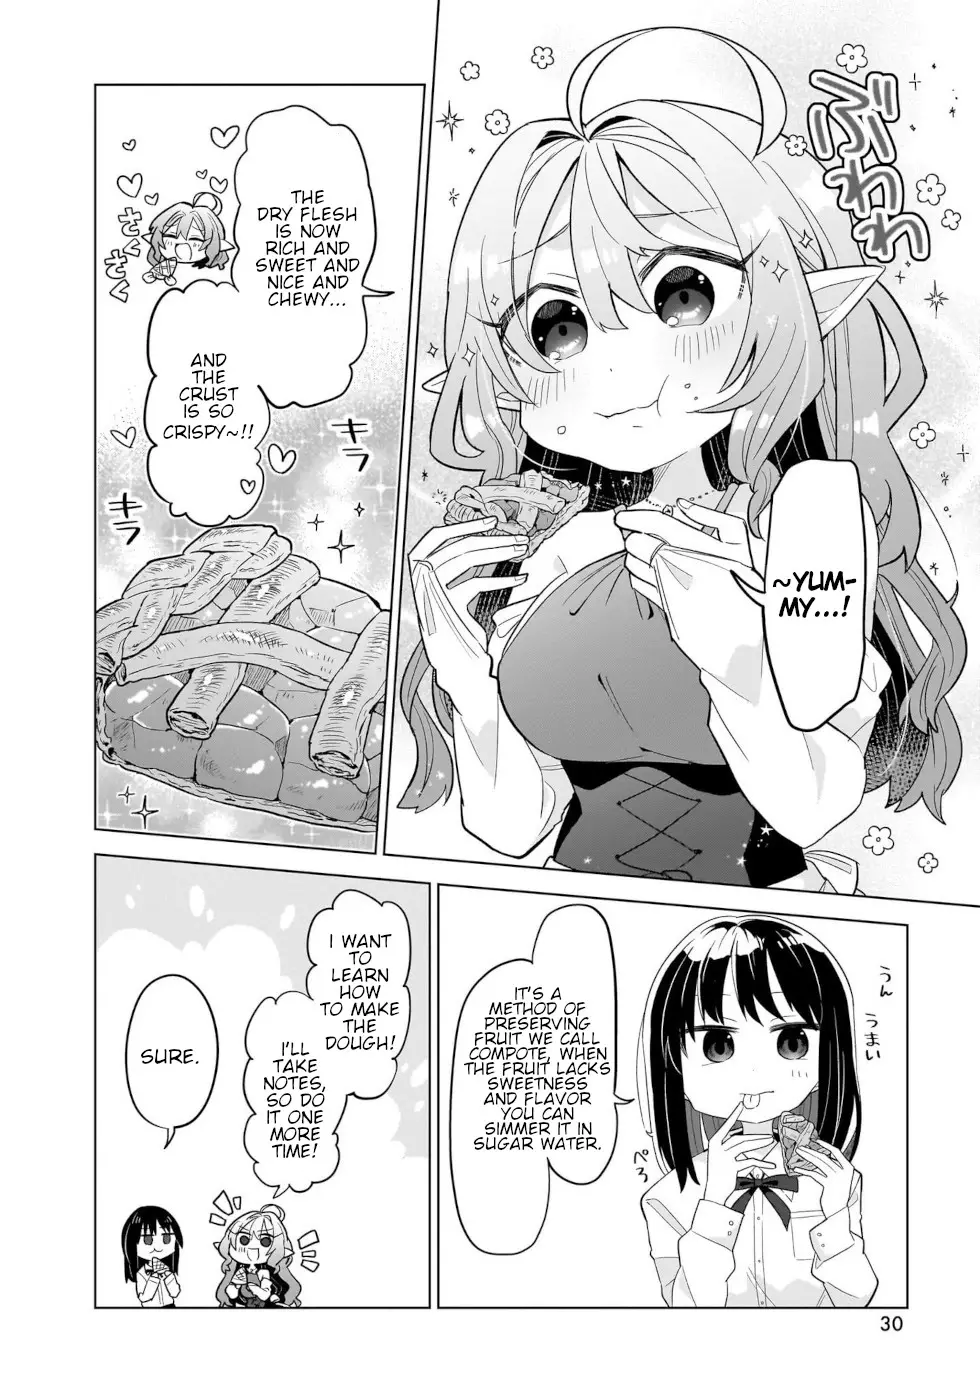 Sweets, Elf, And A High School Girl - 1 page 25-e3f235ab